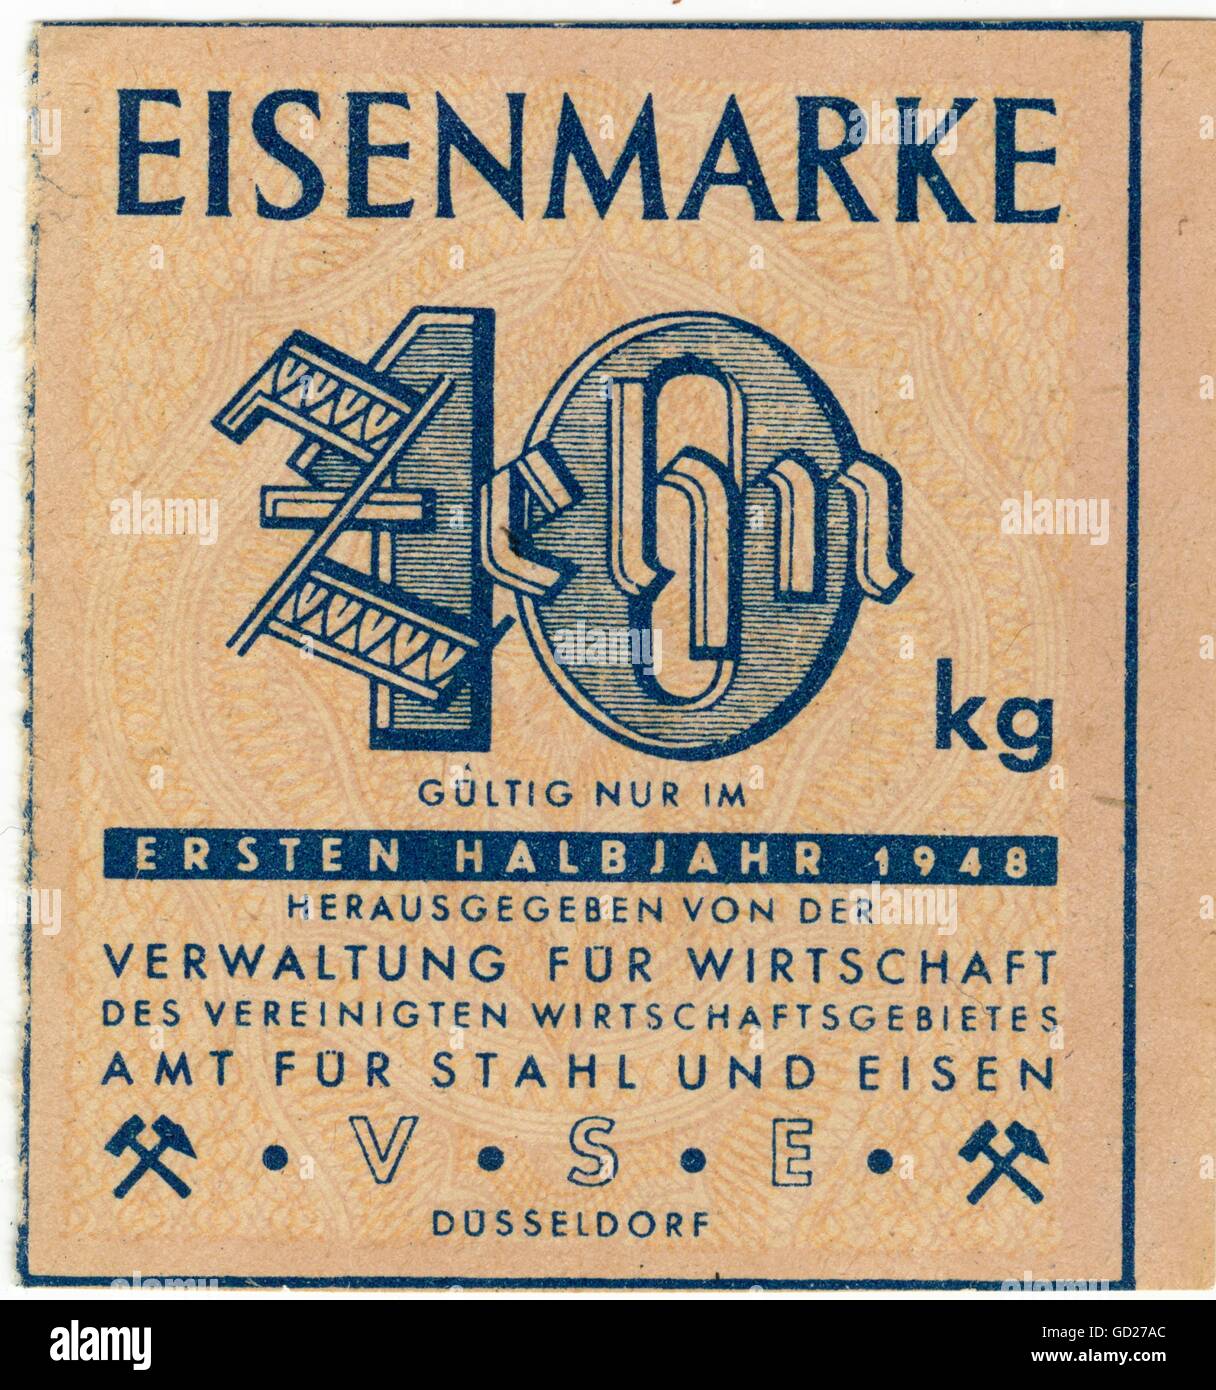 postwar era, Germany, time of the occupation regime, ration card for iron for 10 kilogramme, valid in the first six months of 1948, issued by the administrative authority of economy of the united occupied zone, department of steel and iron, ration cards, rationing, industry, production, history, in the forties of the twentieth century, historic, historical, clipping, cut out, cut-out, cut-outs, 20th century, 1940s, Additional-Rights-Clearences-Not Available Stock Photo